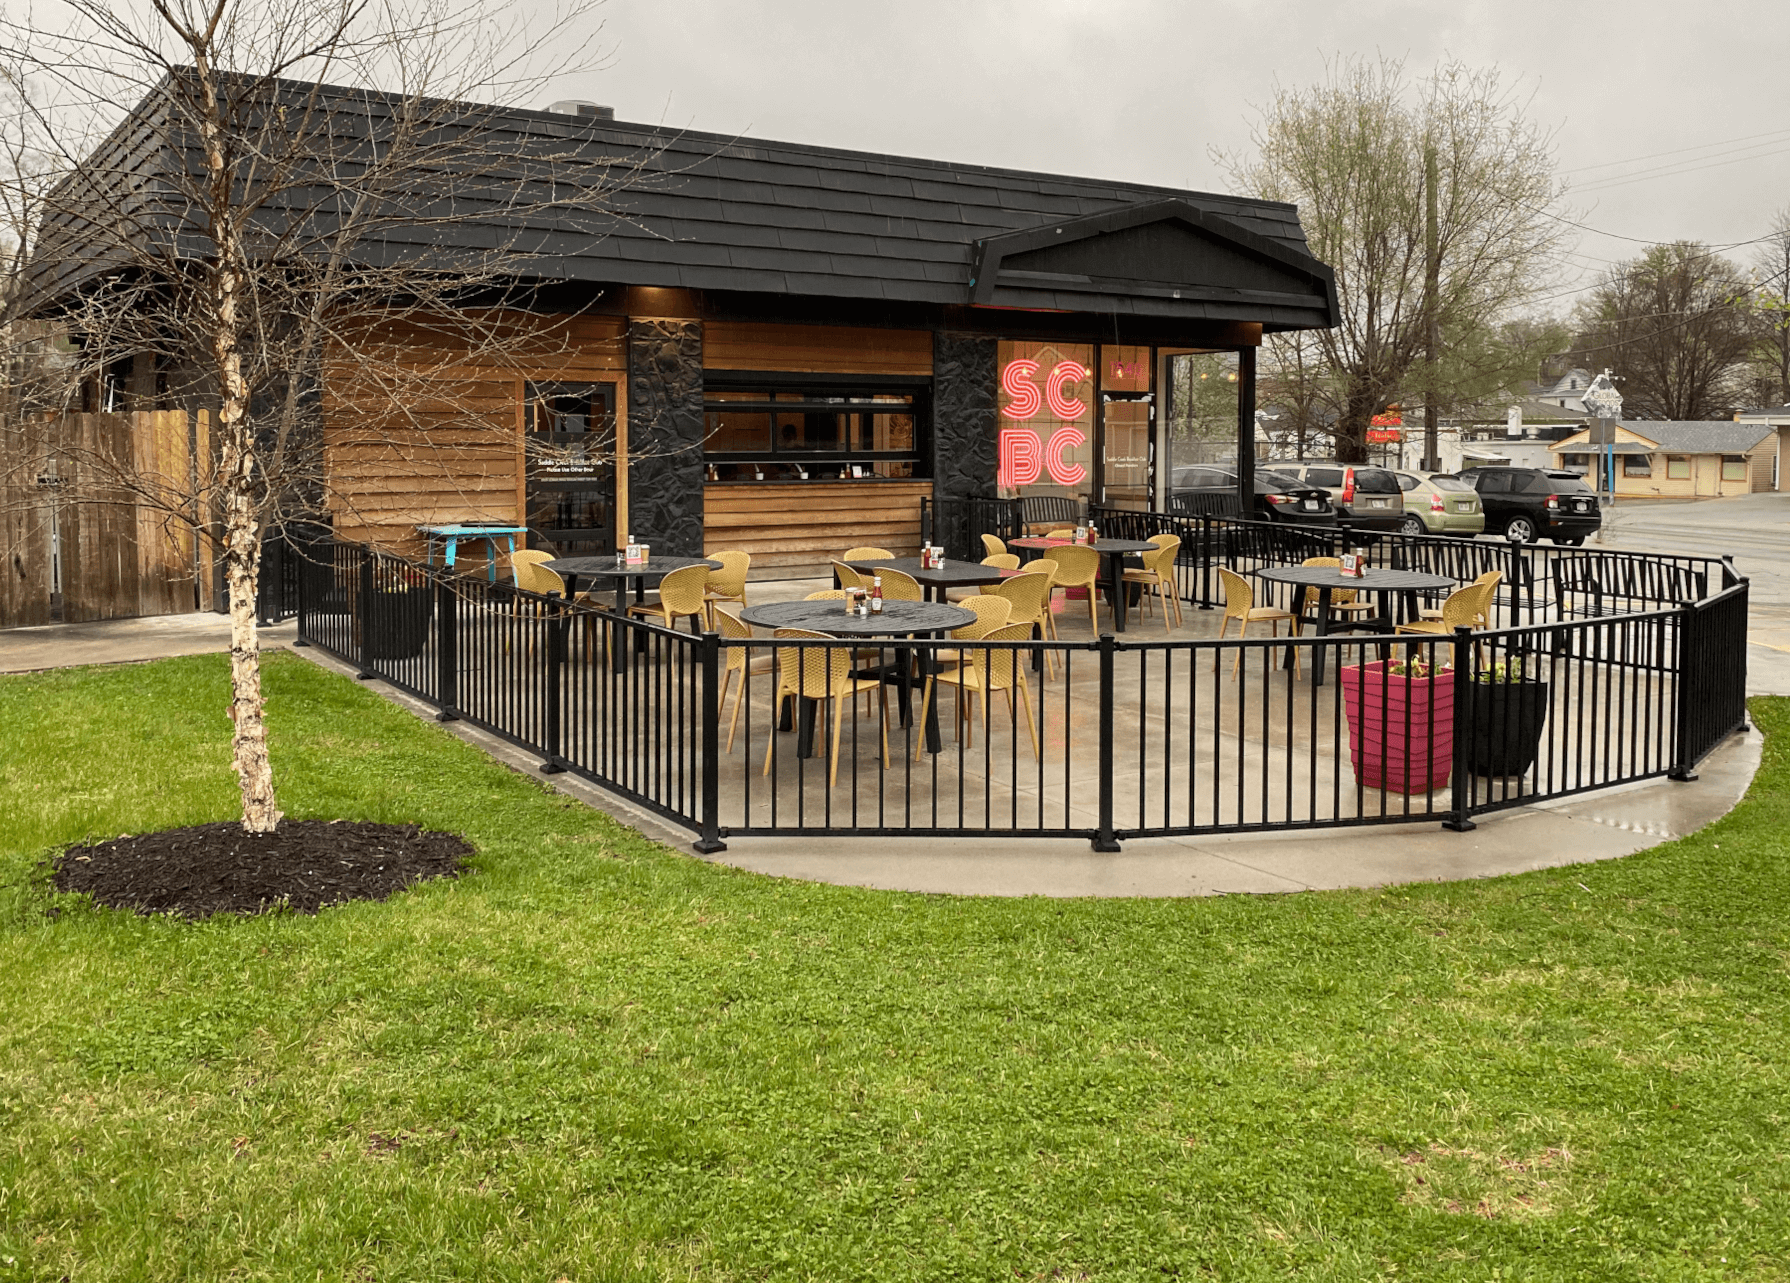 Saddle Creek Breakfast Club with outdoor seating in Omaha